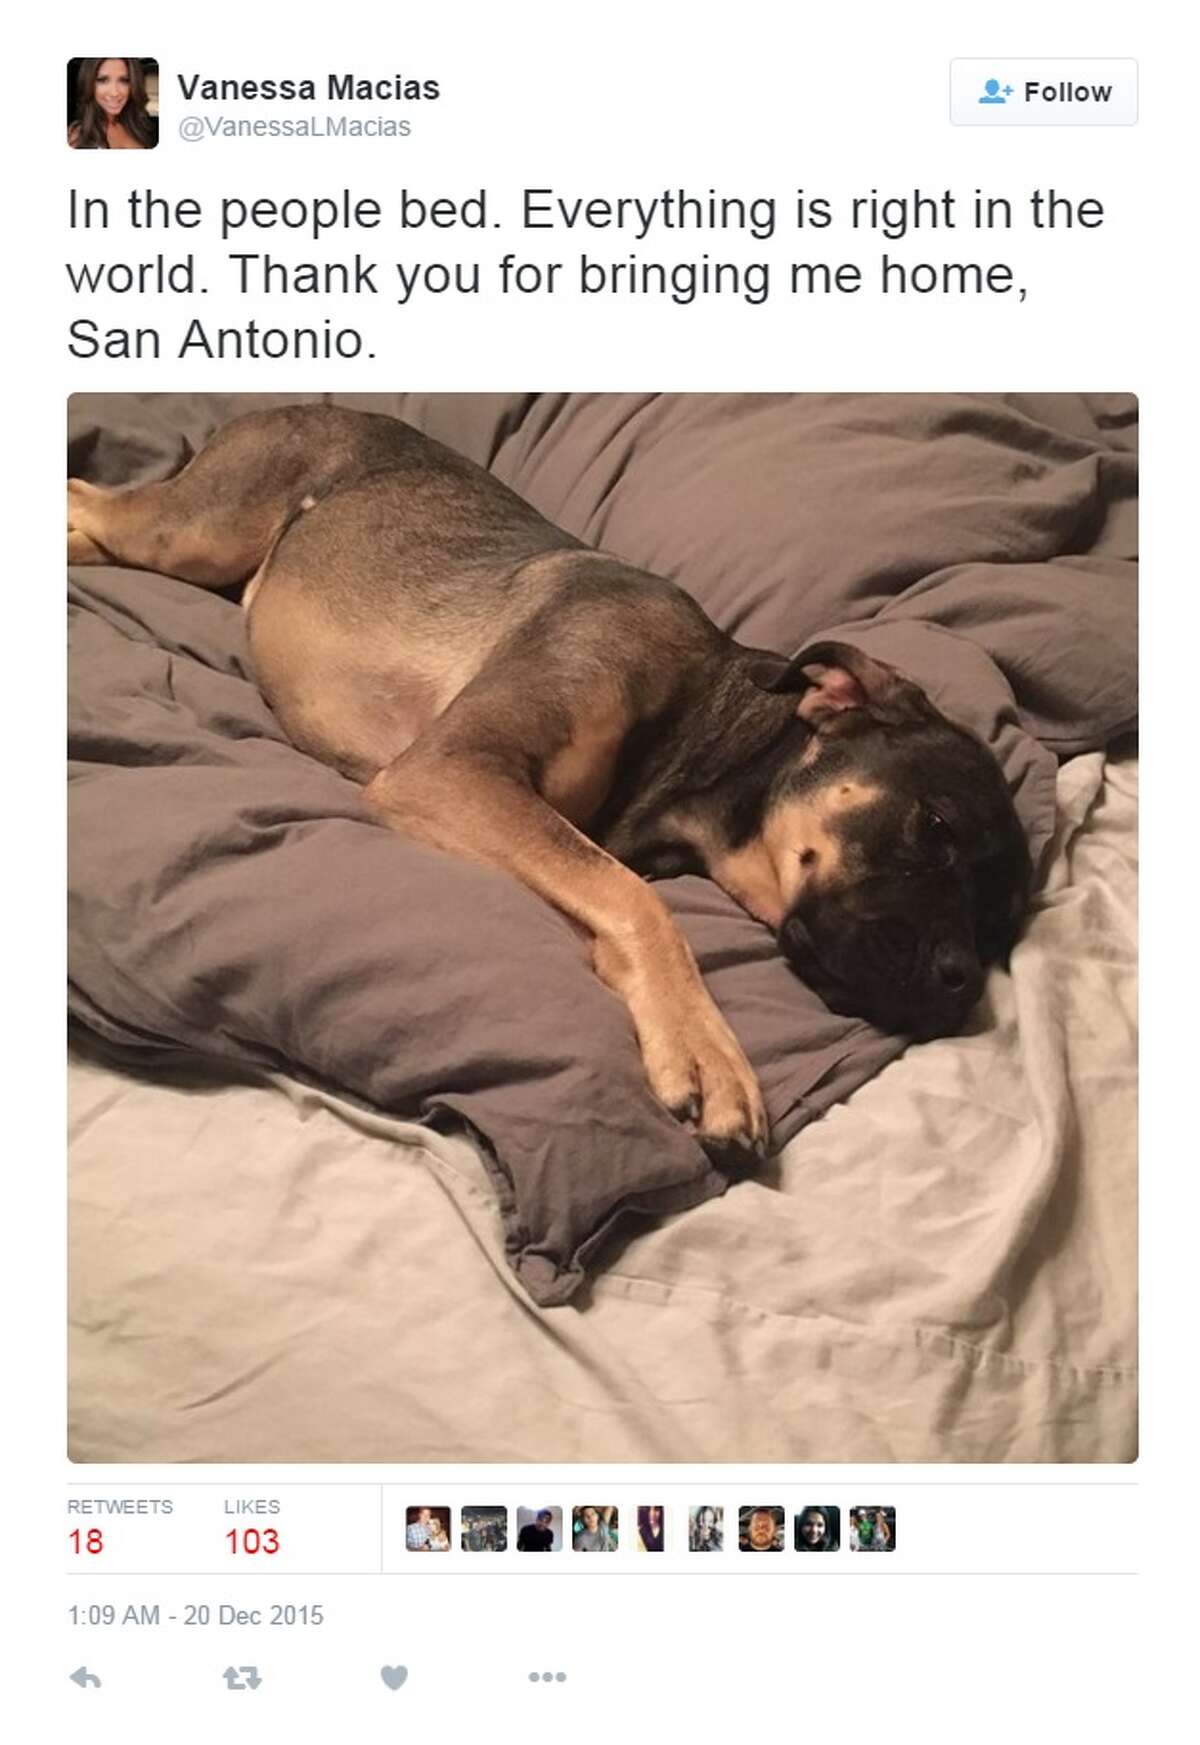 "In the people bed. Everything is right in the wold. Thank you for me home, San Antonio."